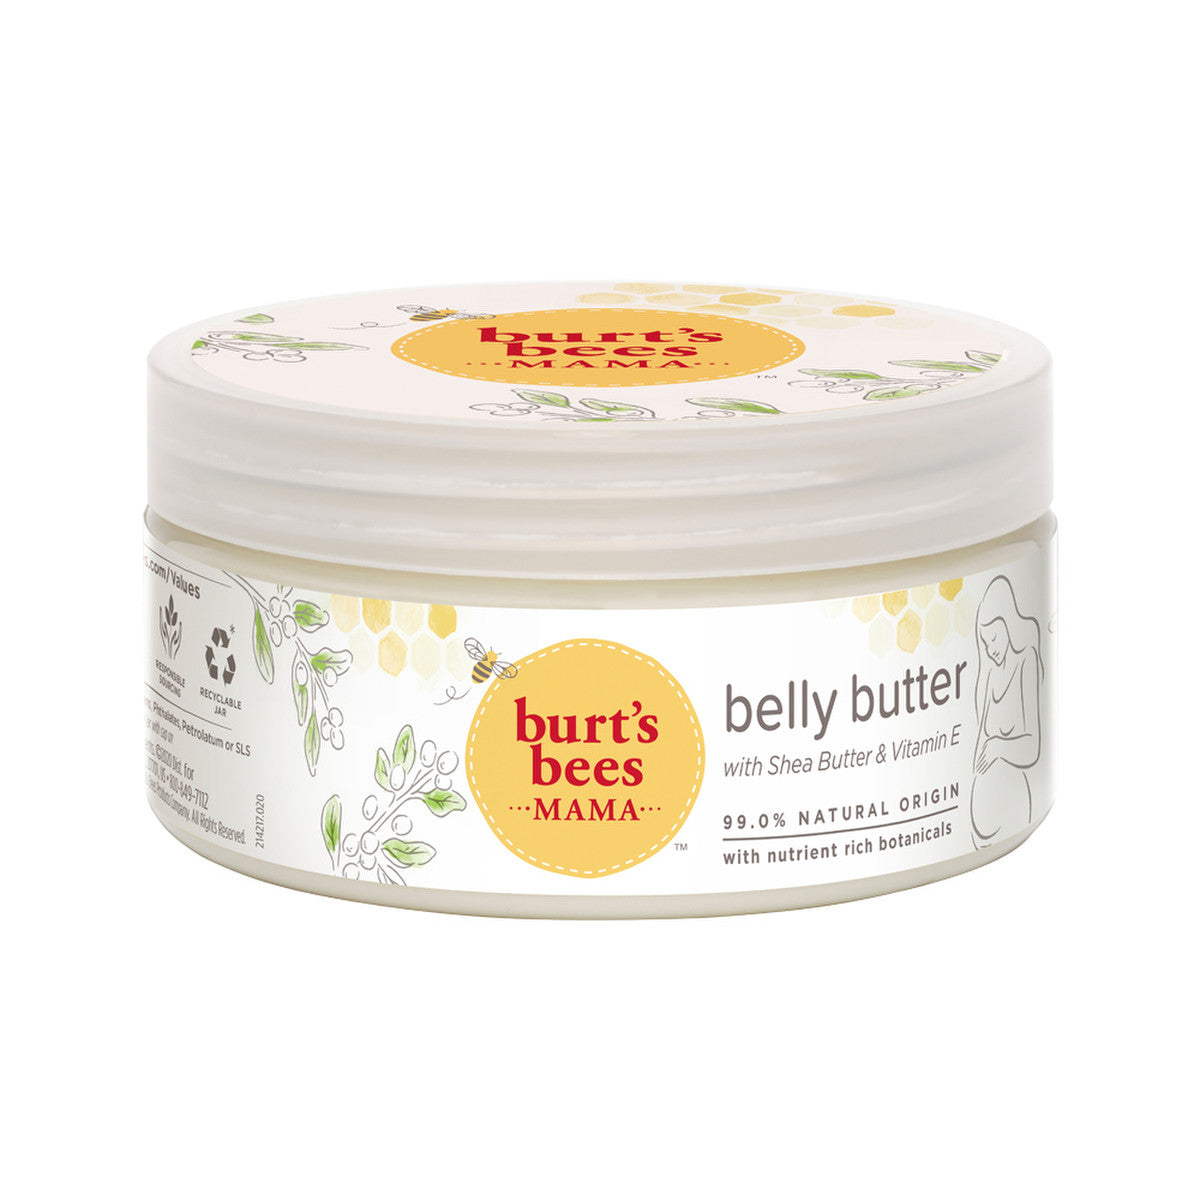 Burts Bees - Mama Bee Belly Butter